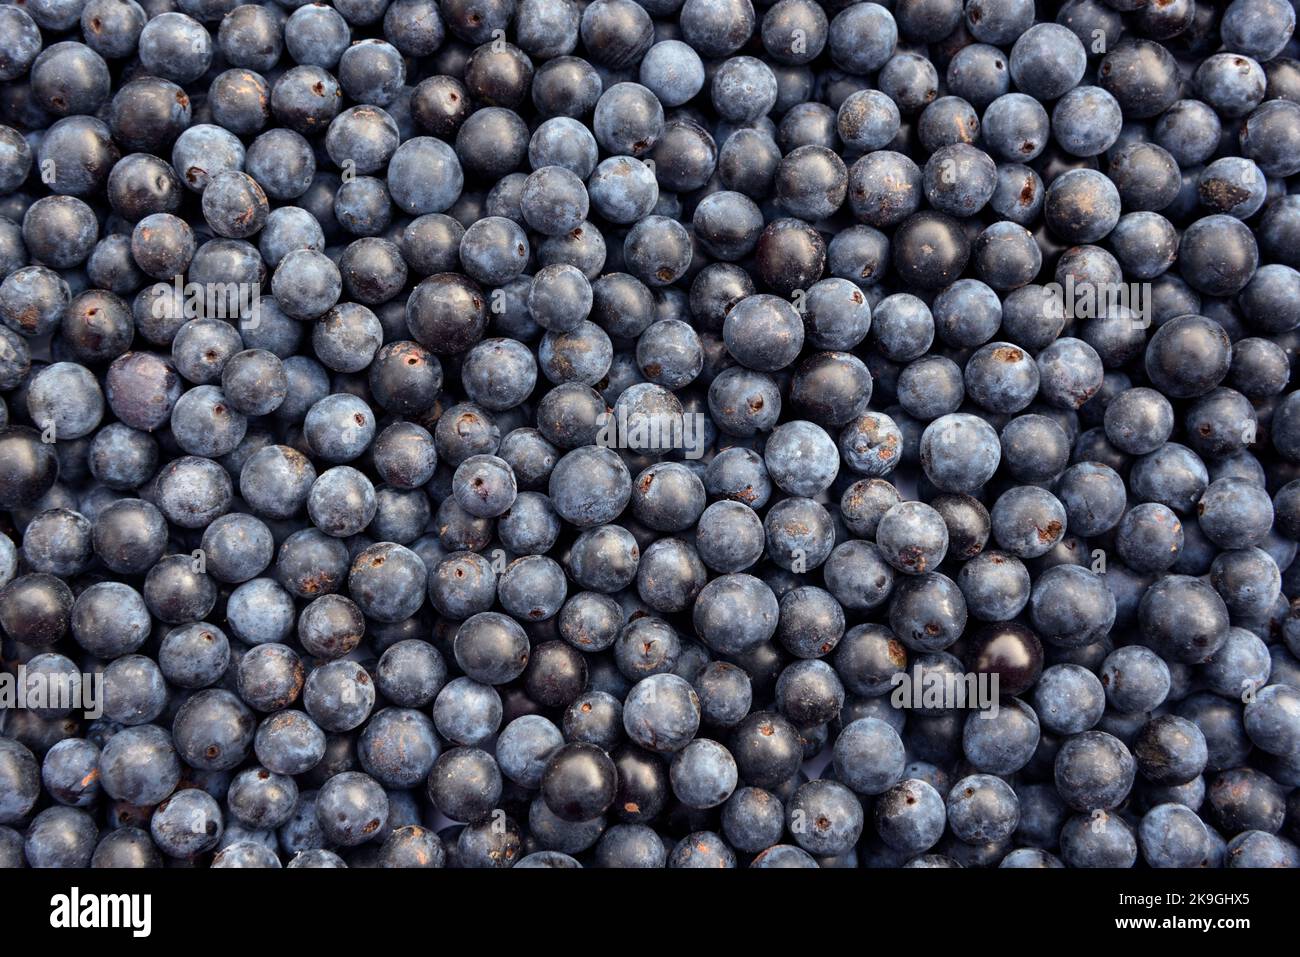 Sloe berries, the fruit of blackthorn bushes (Prunus spinosa), are used for making sloe gin after the first frost of winter Stock Photo